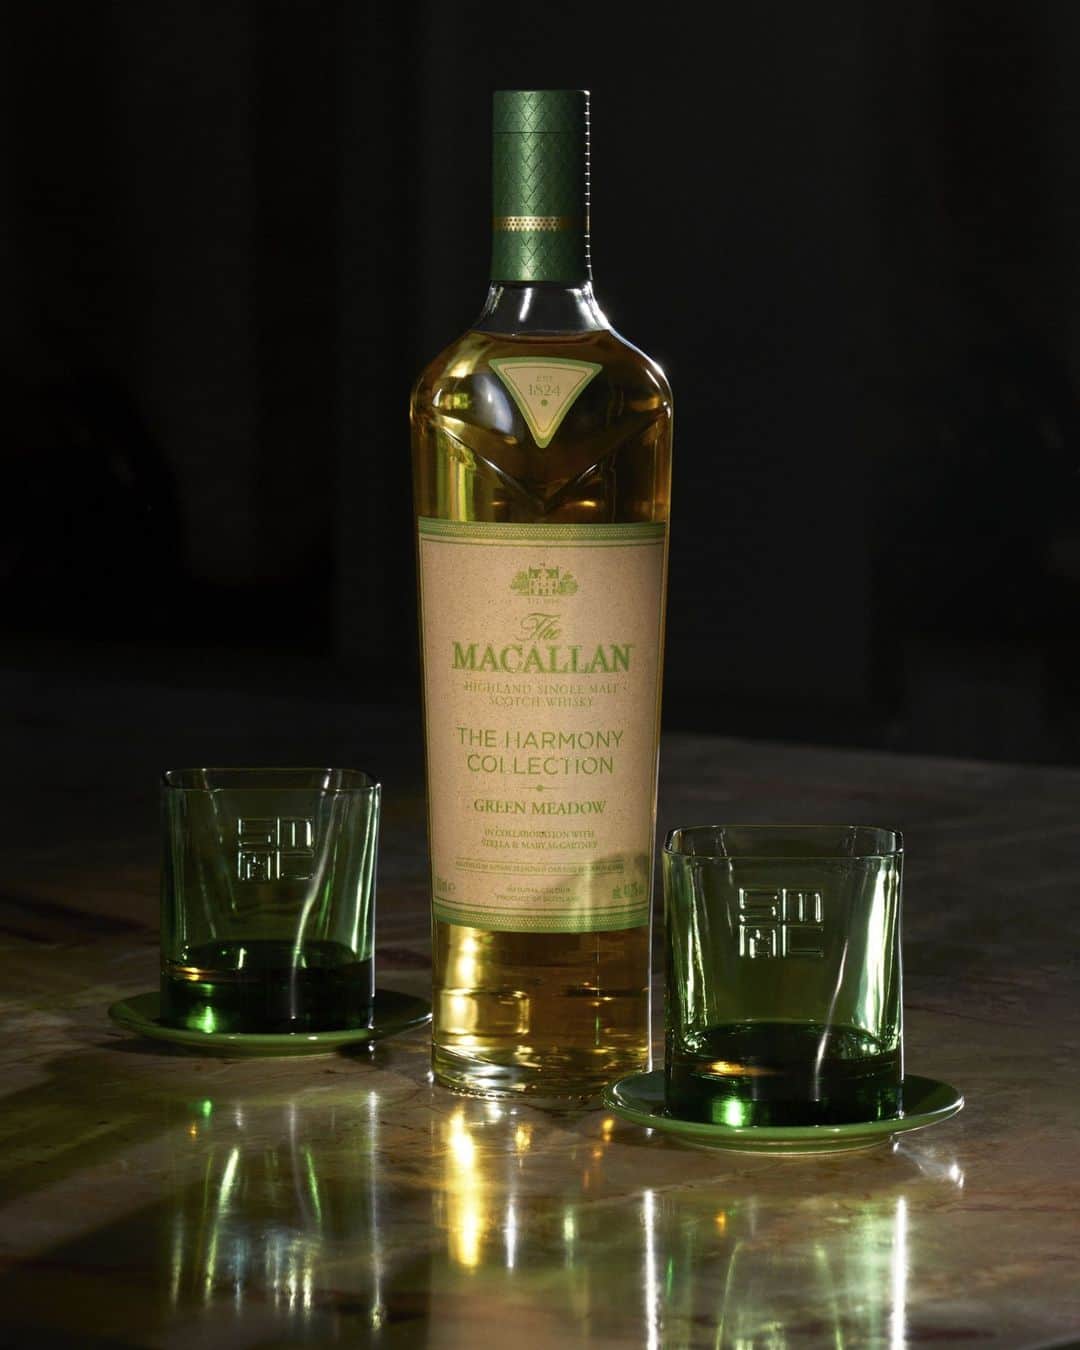 The Macallanのインスタグラム：「TOGETHER: A Collection  for The Macallan by Stella and Mary McCartney is inspired by nature. A limited Collection of lifestyle pieces that brings  our senses alive and the spirit of The Macallan harmoniously into the home.⁣ ⁣ Carefully crafted by hand and using techniques honed over centuries, TOGETHER is a masterpiece of precision and artistry, a true testament to craftsmanship. Every piece reflects the individual artistry of specialist artisans, harmoniously balancing shape, texture and colour. Each item is inherently unique and timeless. ⁣ ⁣ Photography by @marymccartney⁣ ⁣ Discover more via our link in bio. ⁣ ⁣ Crafted without compromise. Please savour The Macallan responsibly.⁣ ⁣ #TheMacallan #StellaMcCartney #MaryMcCartney #InspiredbyNature」